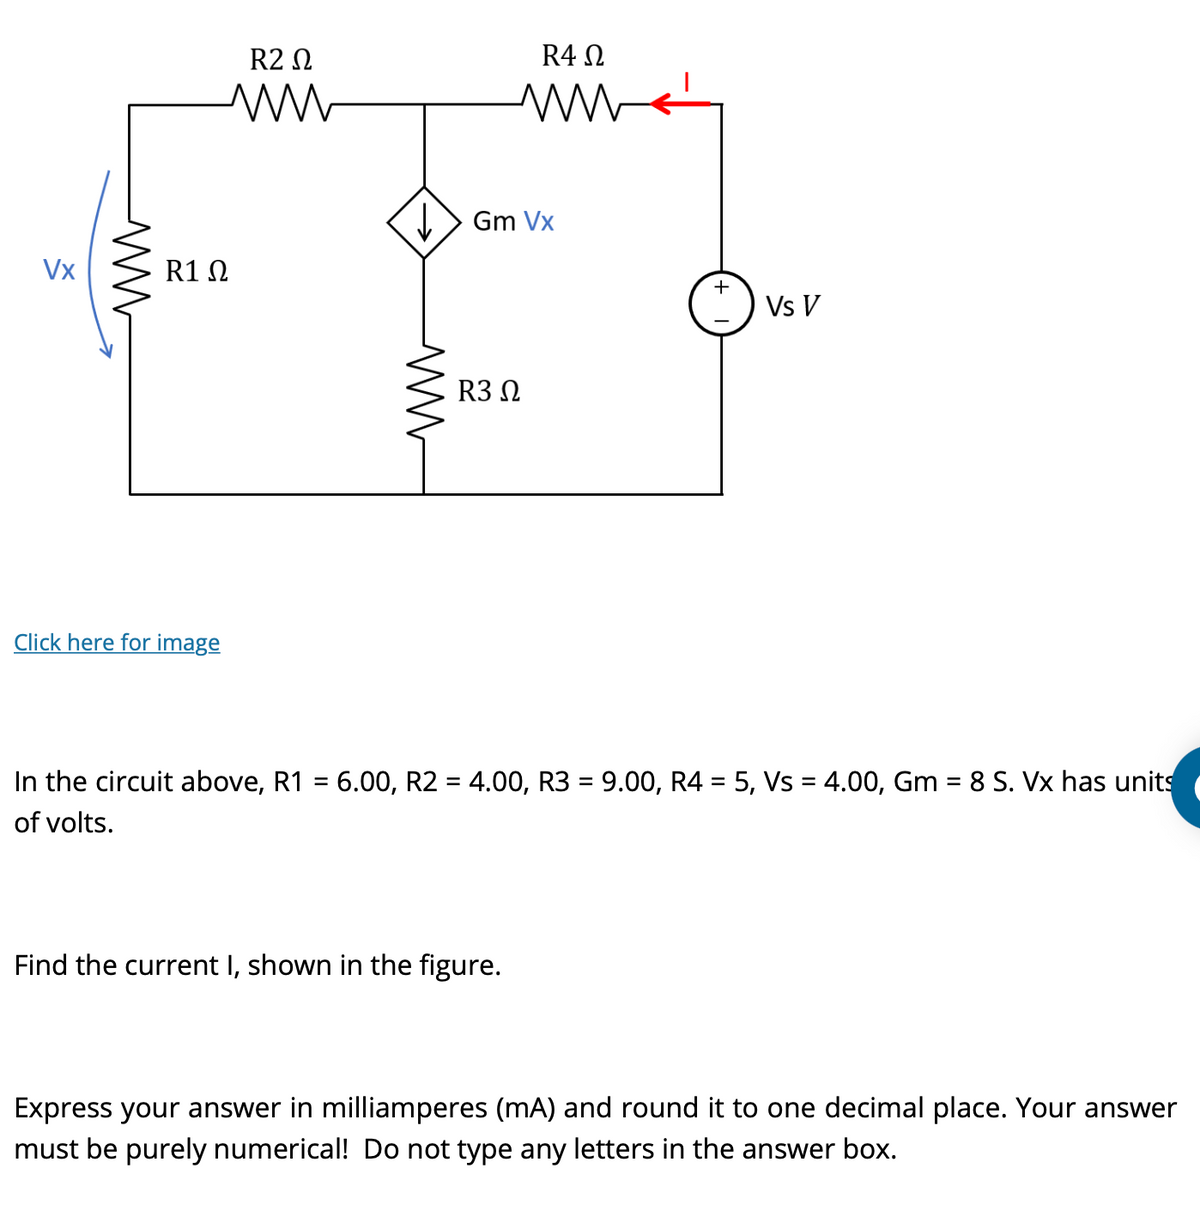 Vx
ww
R2 Ω
ww
R1 Ω
Click here for image
ww
R4 Ω
ww
Gm Vx
R3 Ω
Find the current I, shown in the figure.
+
Vs V
In the circuit above, R1 = 6.00, R2 = 4.00, R3 = 9.00, R4 = 5, Vs = 4.00, Gm = 8 S. Vx has units
of volts.
Express your answer in milliamperes (mA) and round it to one decimal place. Your answer
must be purely numerical! Do not type any letters in the answer box.